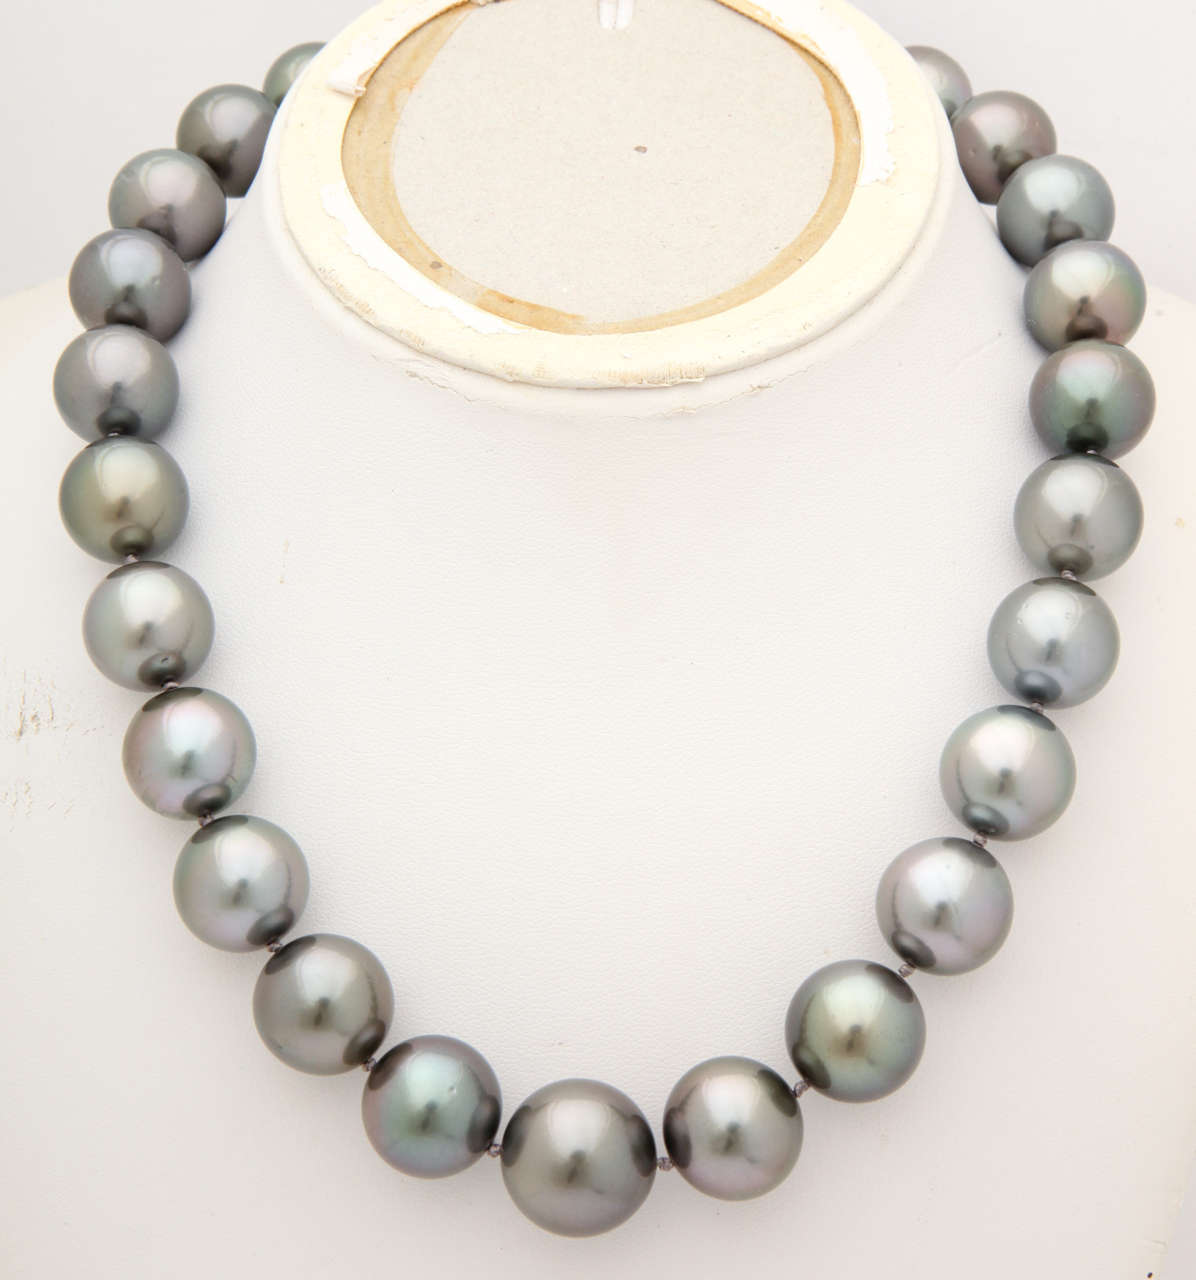 The luster on these pearls is superb. They are extra large, graduating from 17.7 x 15.1. This impressive necklace is finished with an 18 kt white gold  lattice design clasp set with 0.20 cts of white diamonds. A must for the discerning pearl